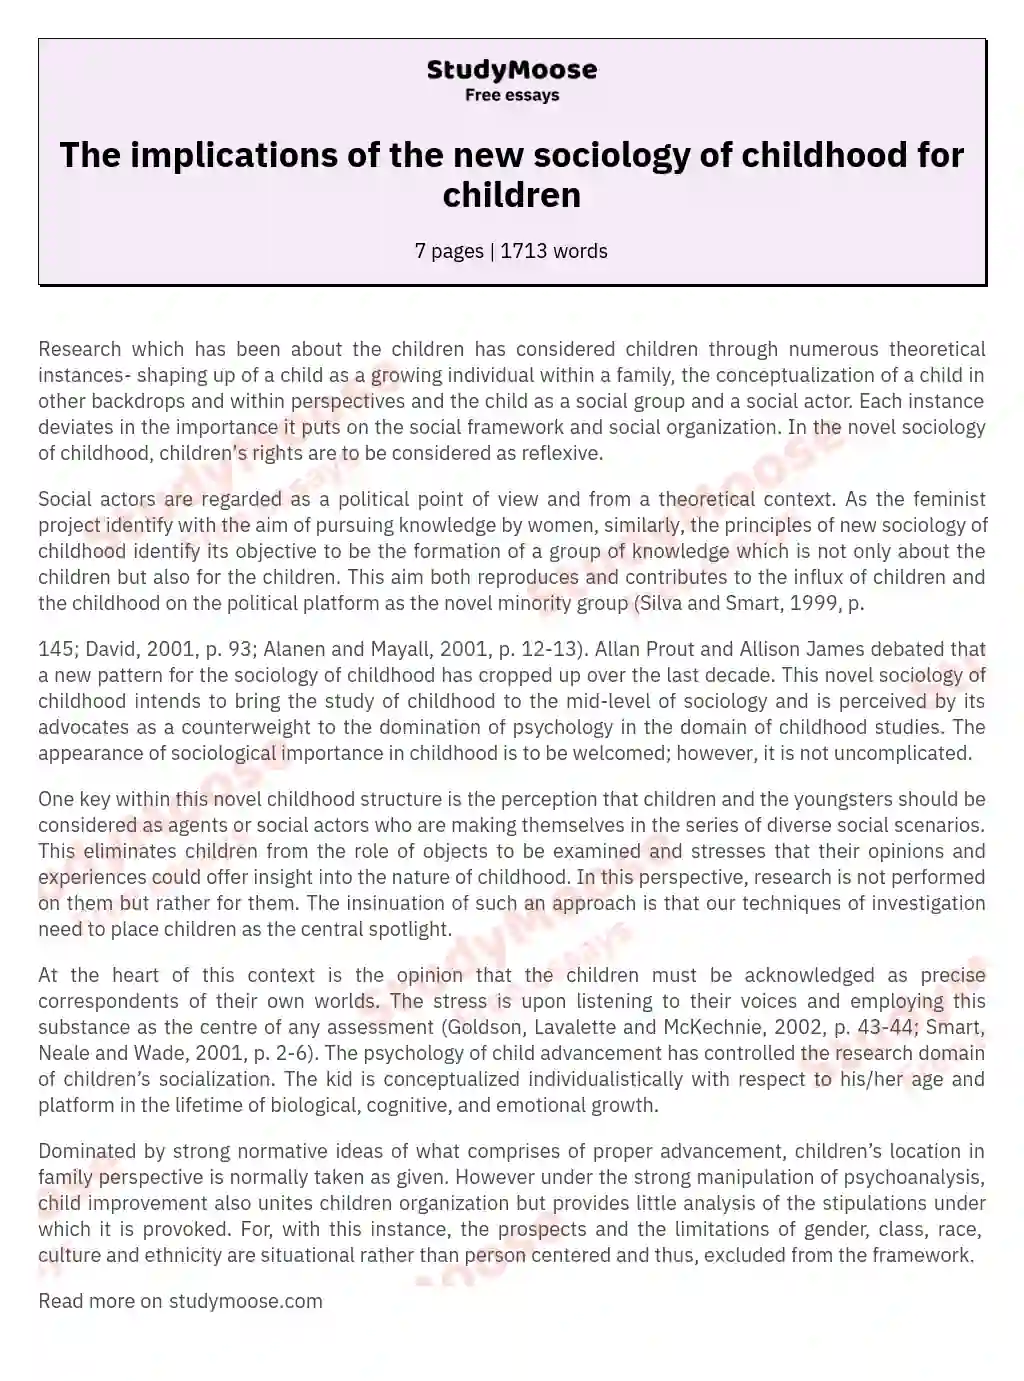 The implications of the new sociology of childhood for children essay